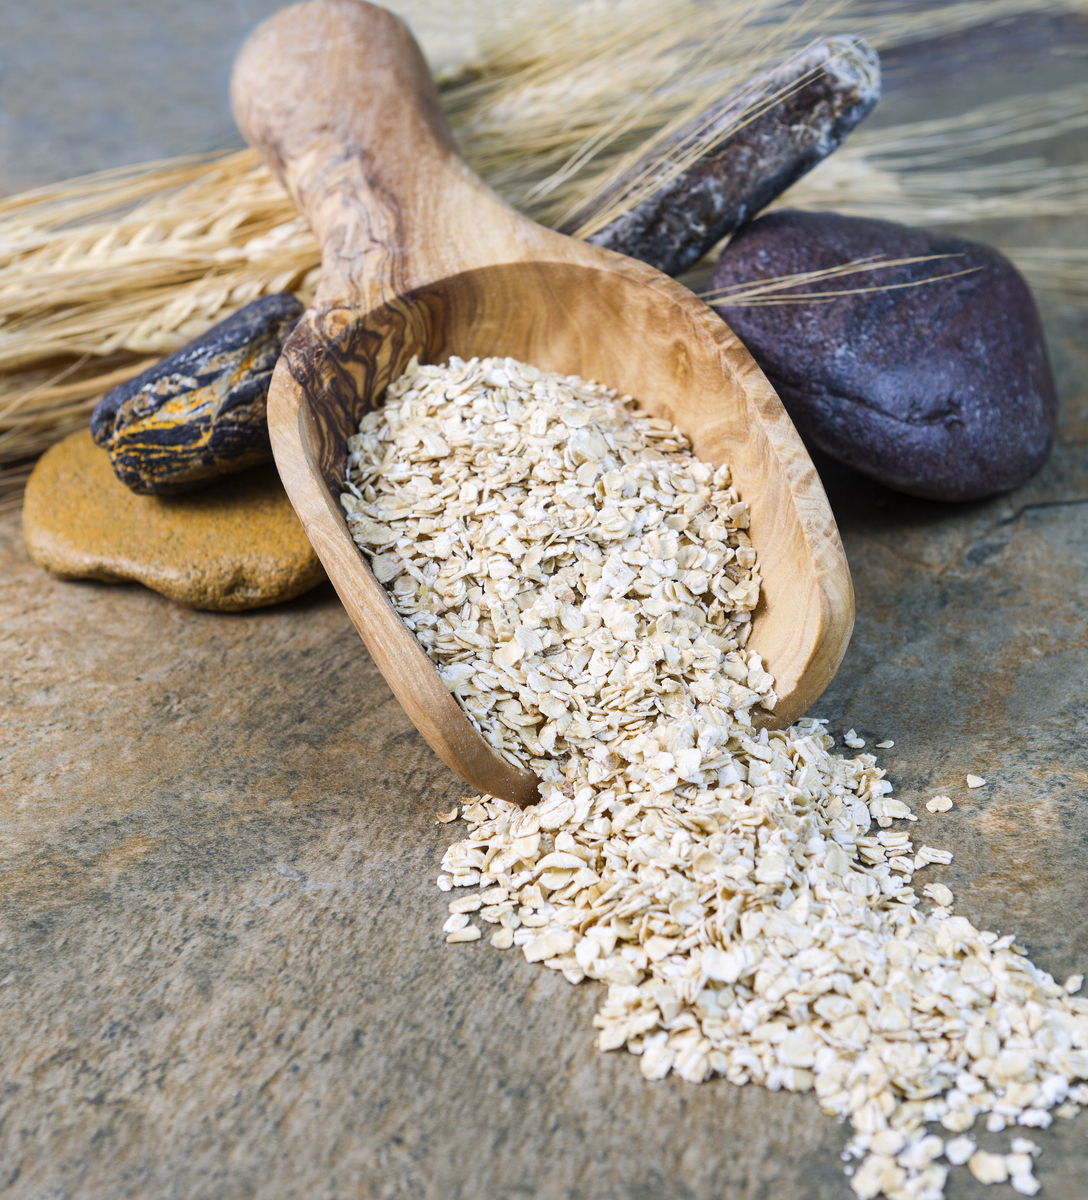 Vertical photo of rolled oats in wooden spoon with rocks and wheat stalks on natural stone